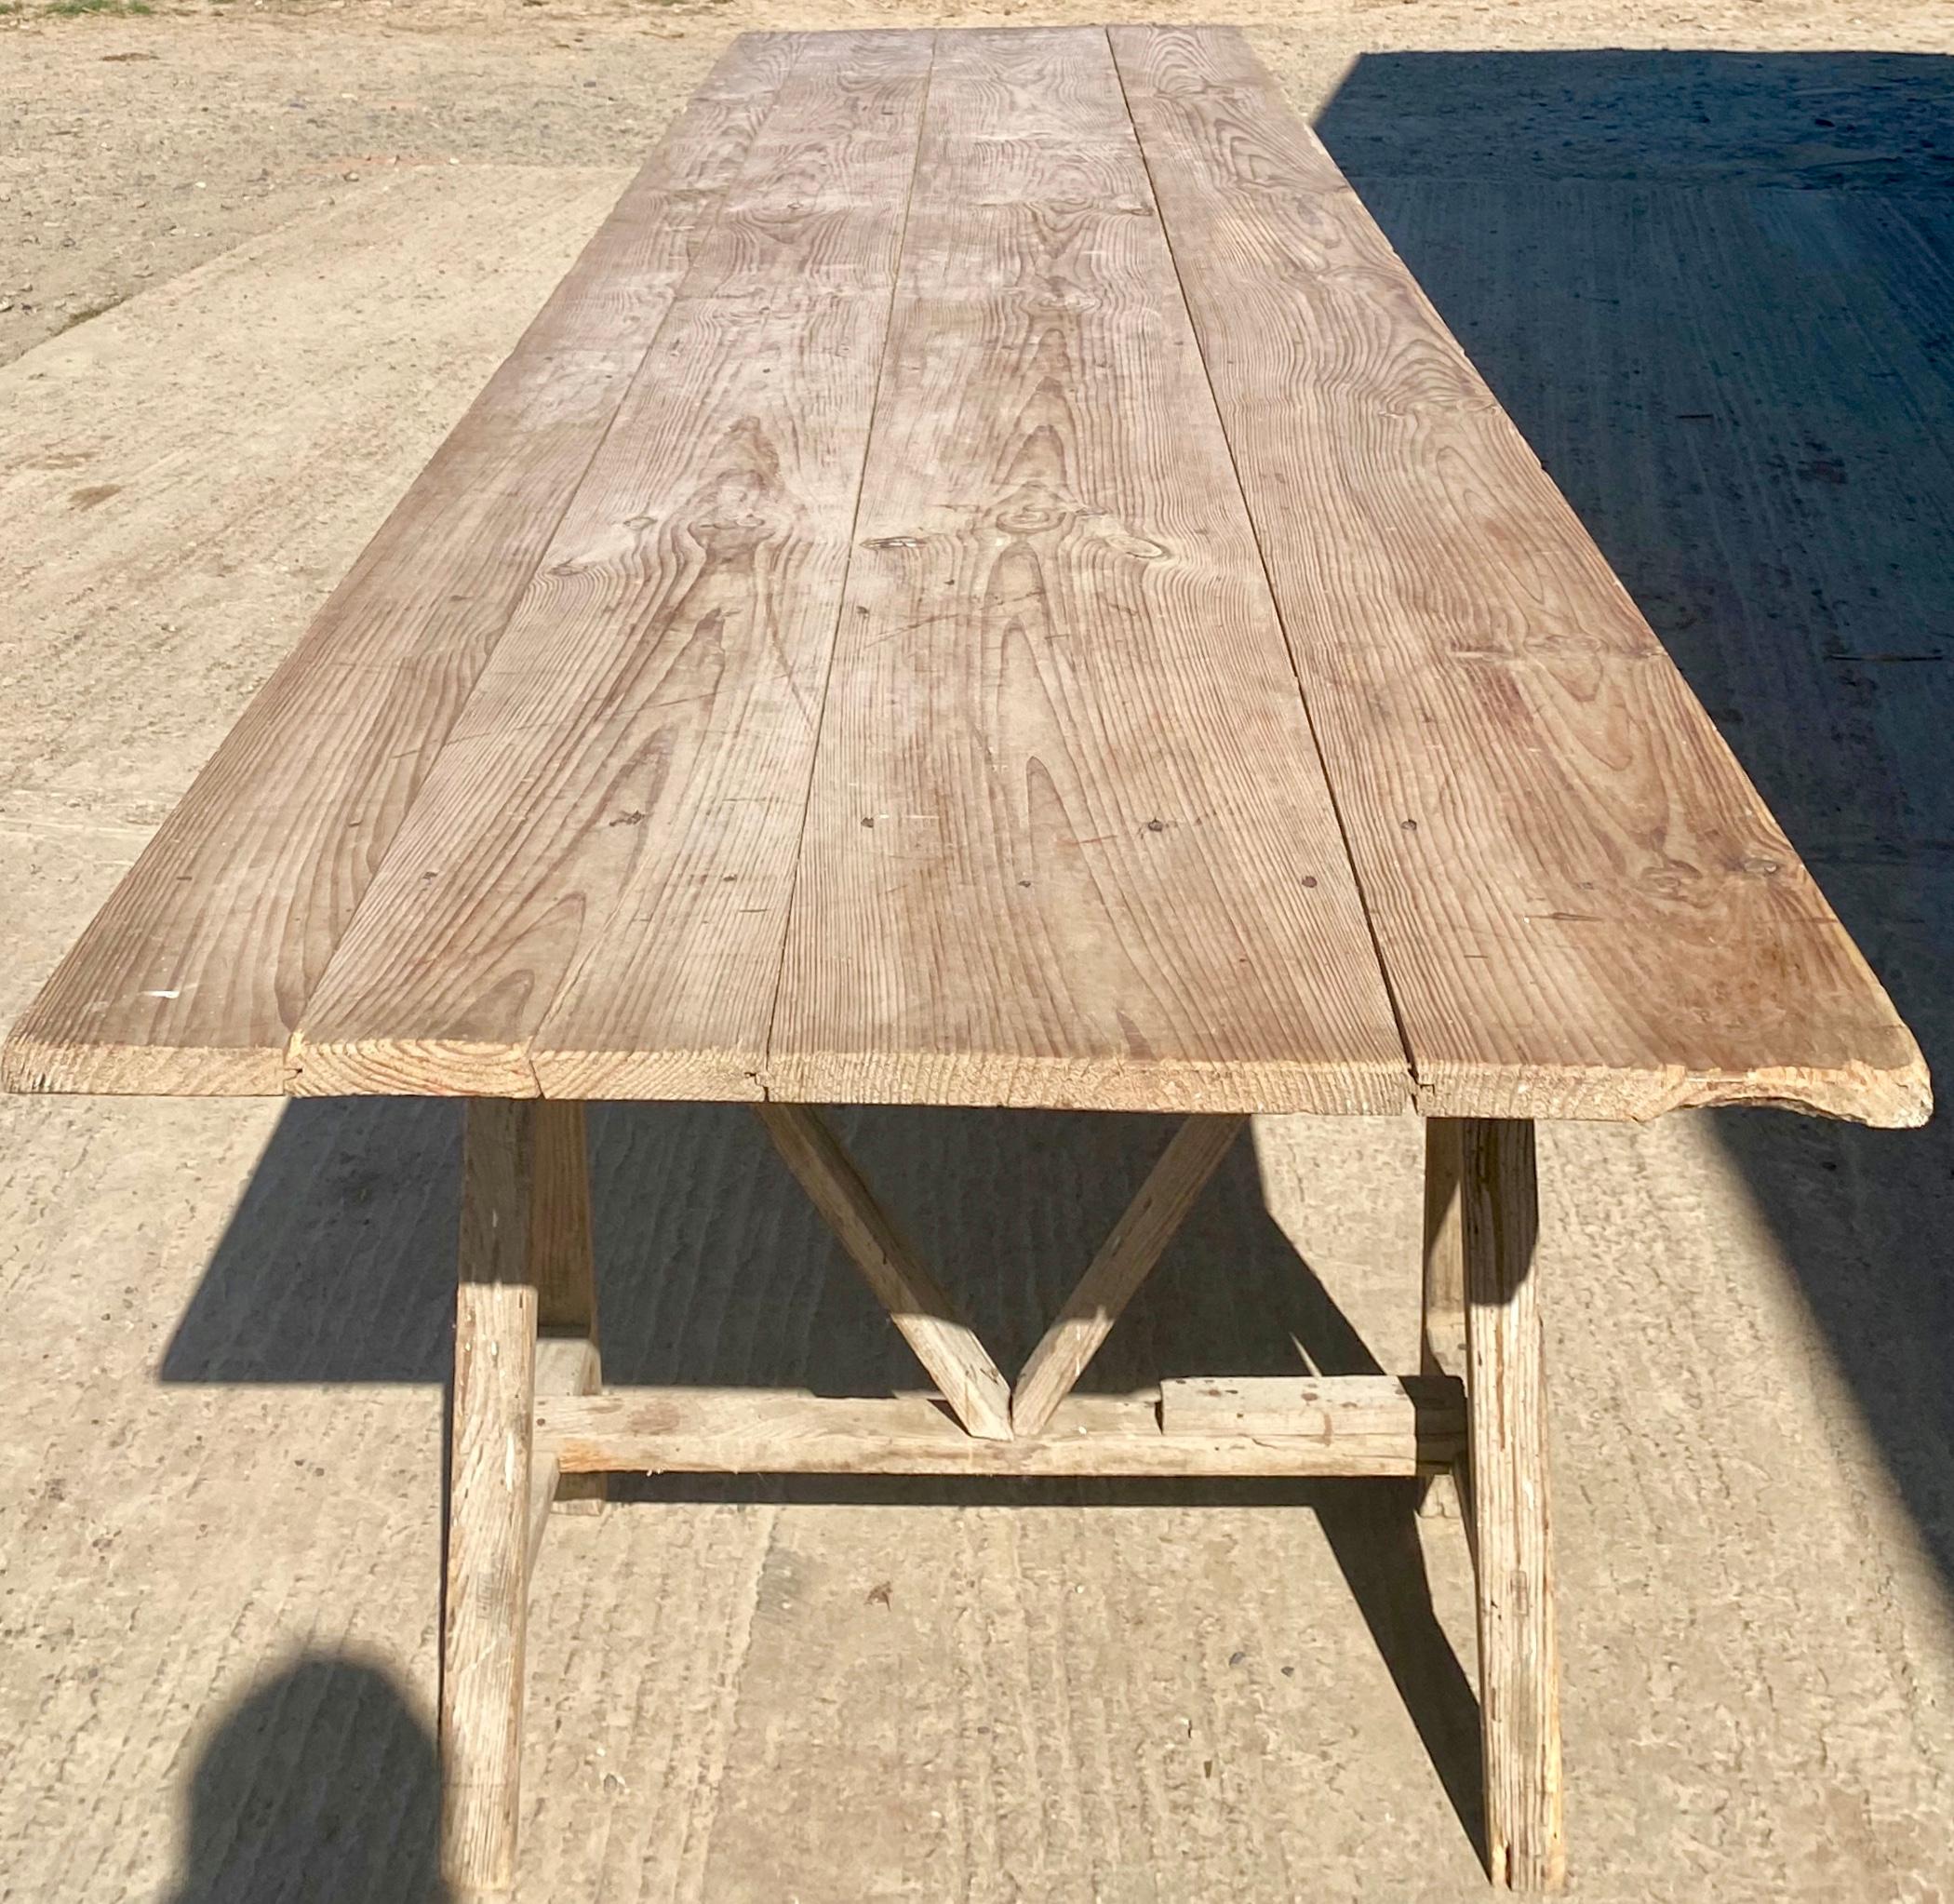 A very large 1920s French pine vendange table. Unusual in its size and width being 4 meters long and 1 meter wide. It has a lovely original patina. Very rare.
  